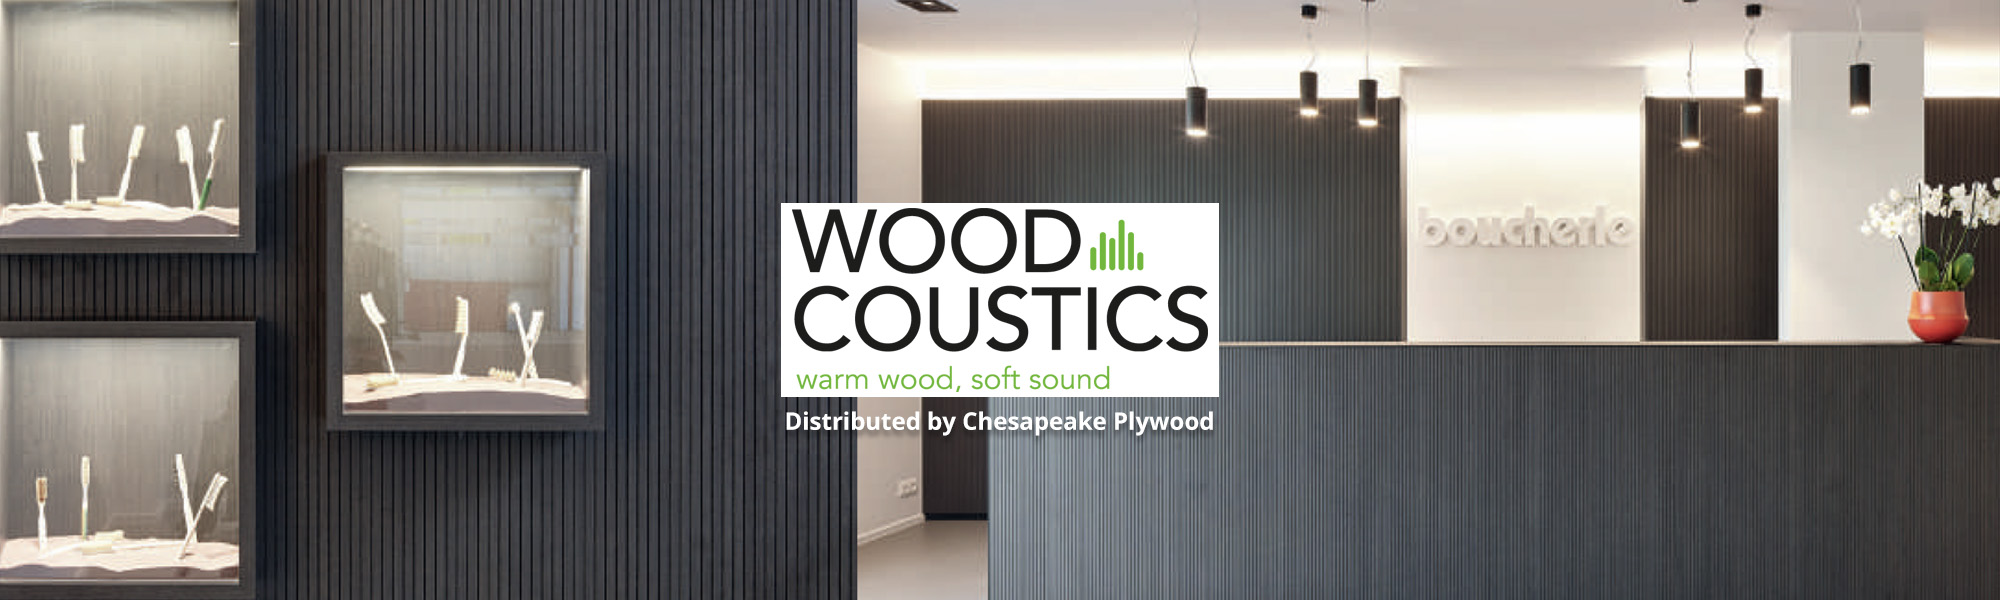 Woodcoustics Distributed by Chesapeake Plywood